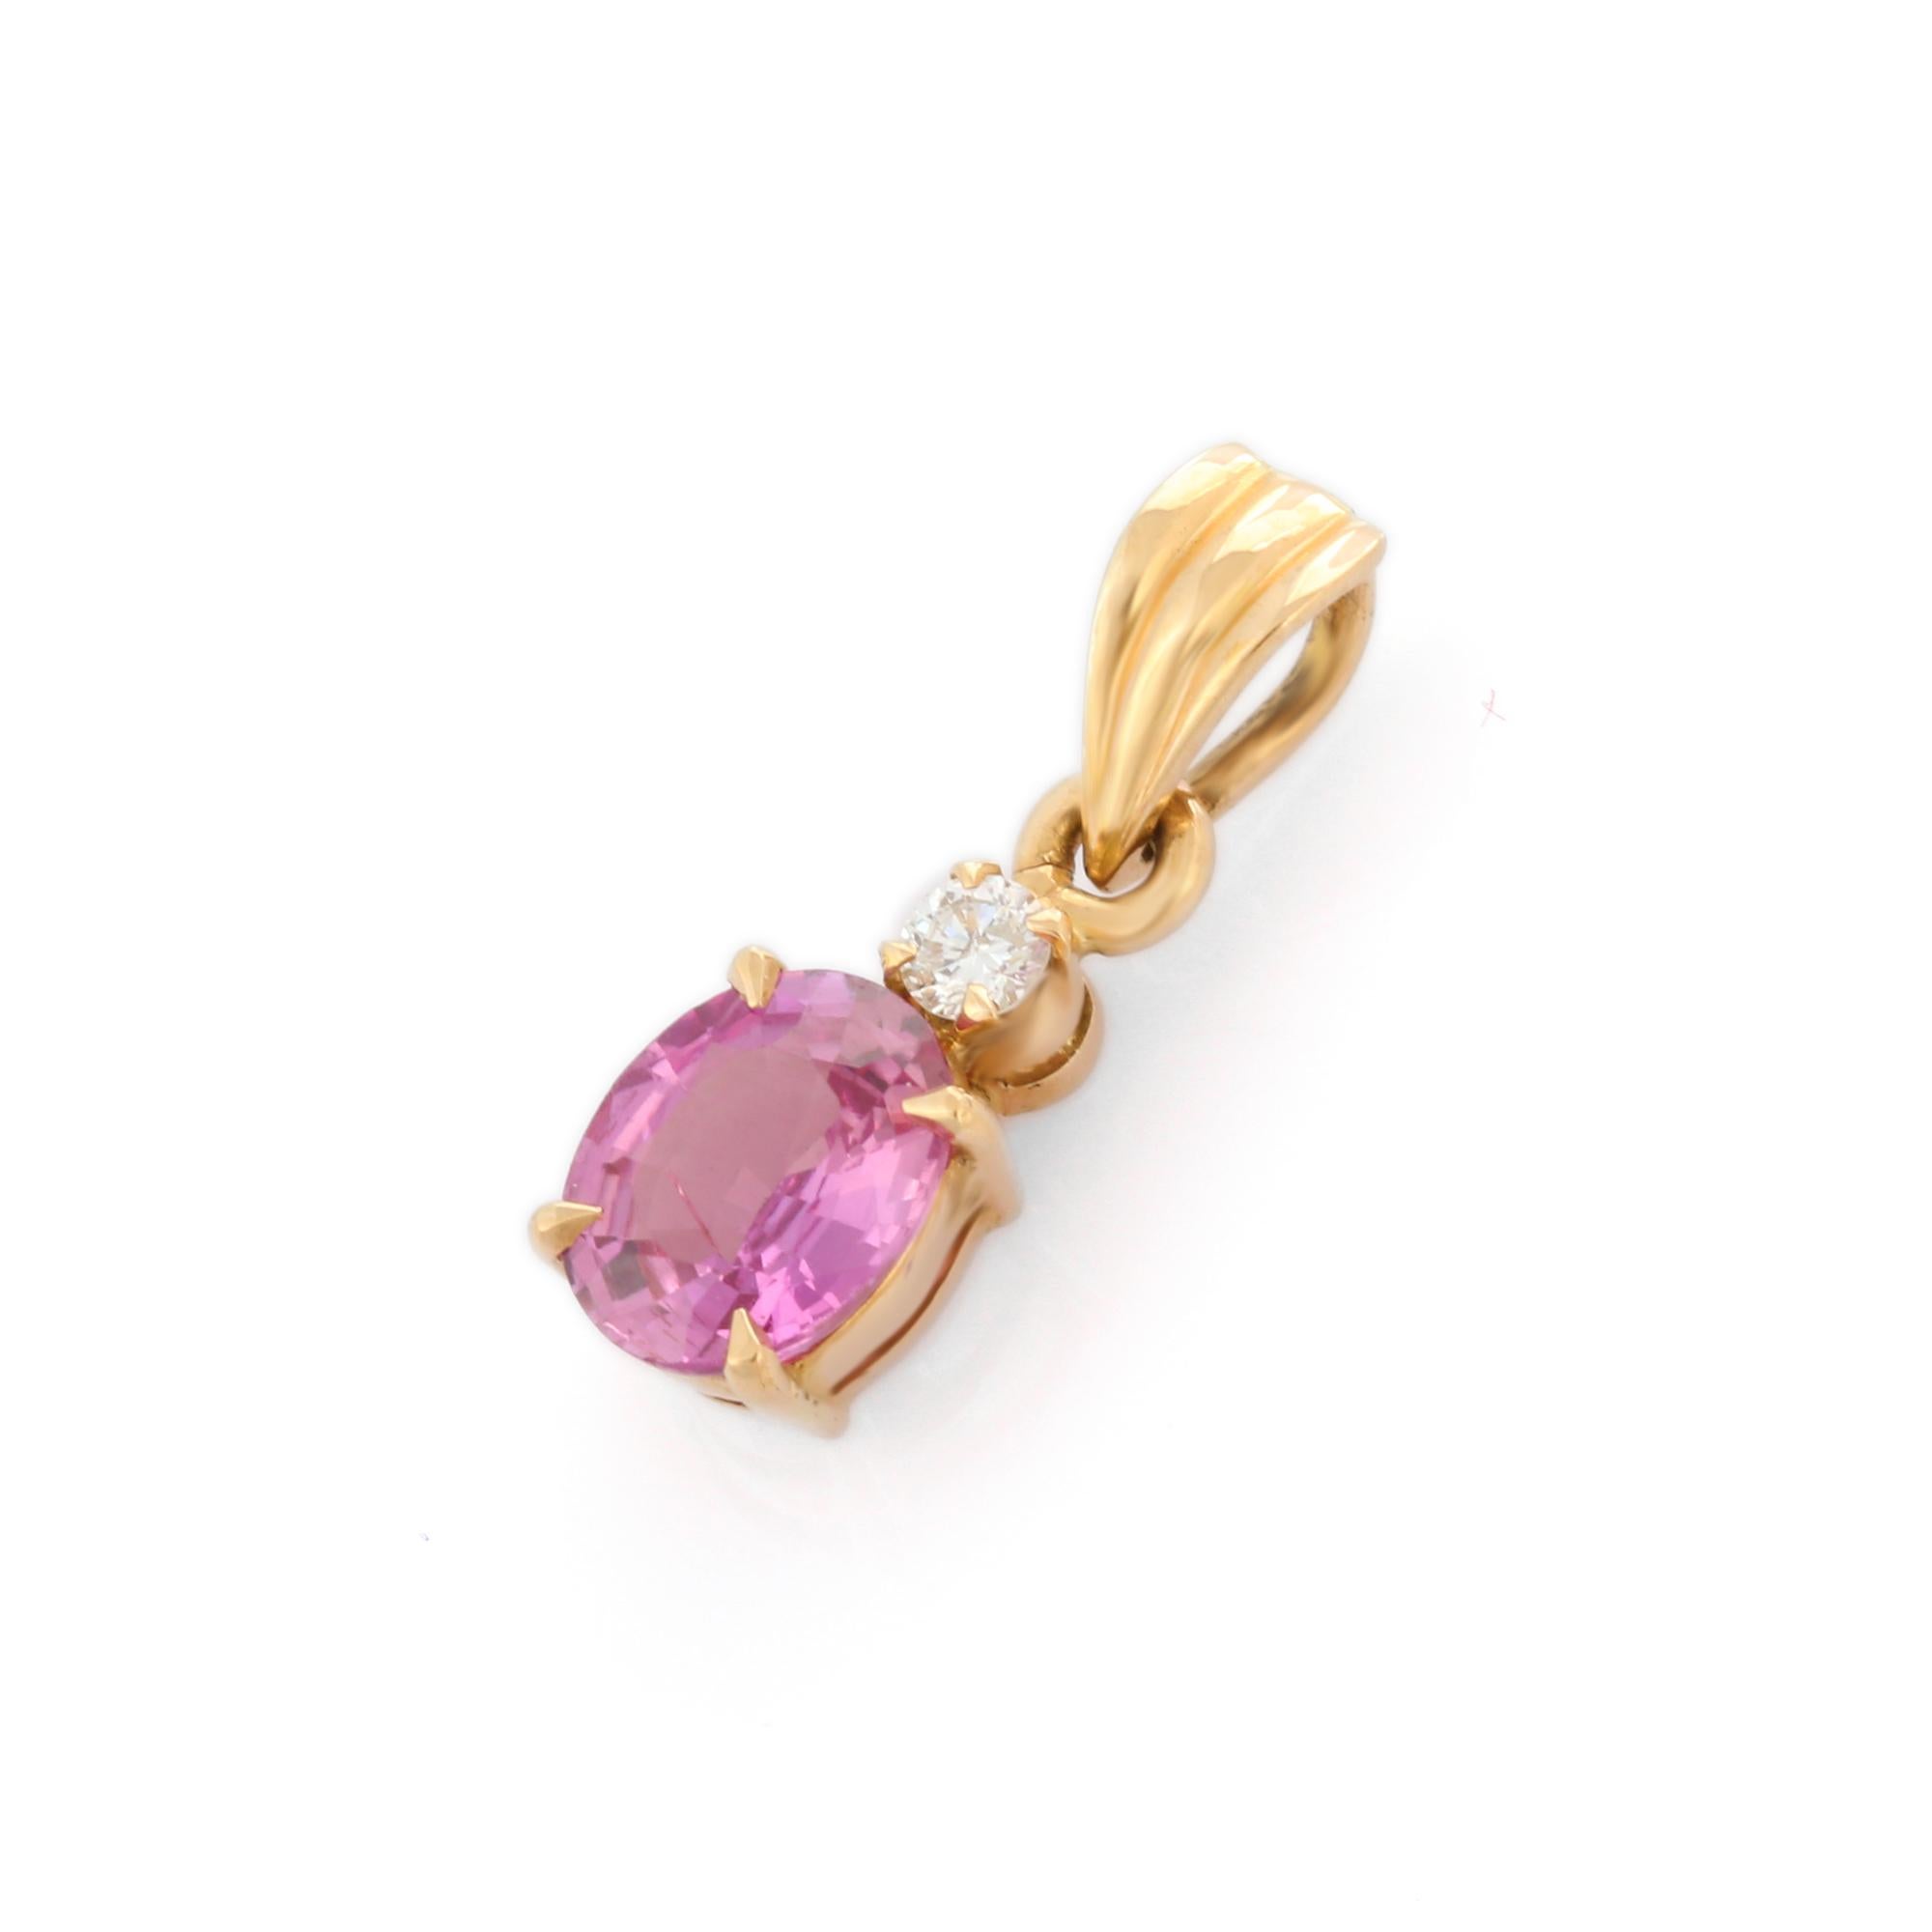 Minimalist 1.29 Ct Oval Pink Sapphire with Diamond Pendant in 18K Yellow Gold In New Condition For Sale In Houston, TX